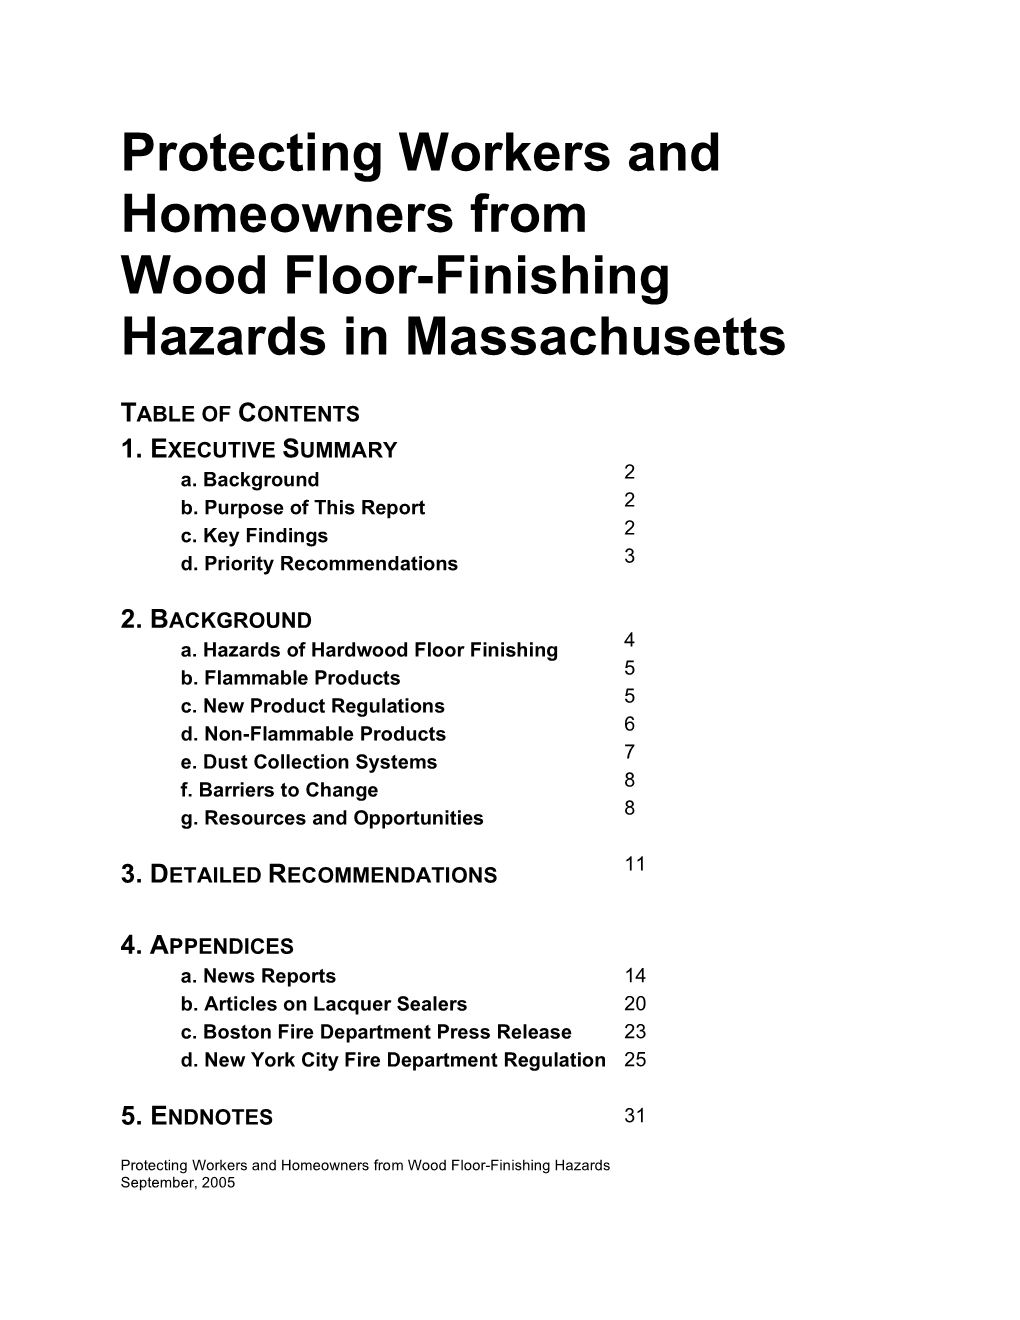 Protecting Workers and Homeowners from Wood Floor-Finishing Hazards in Massachusetts